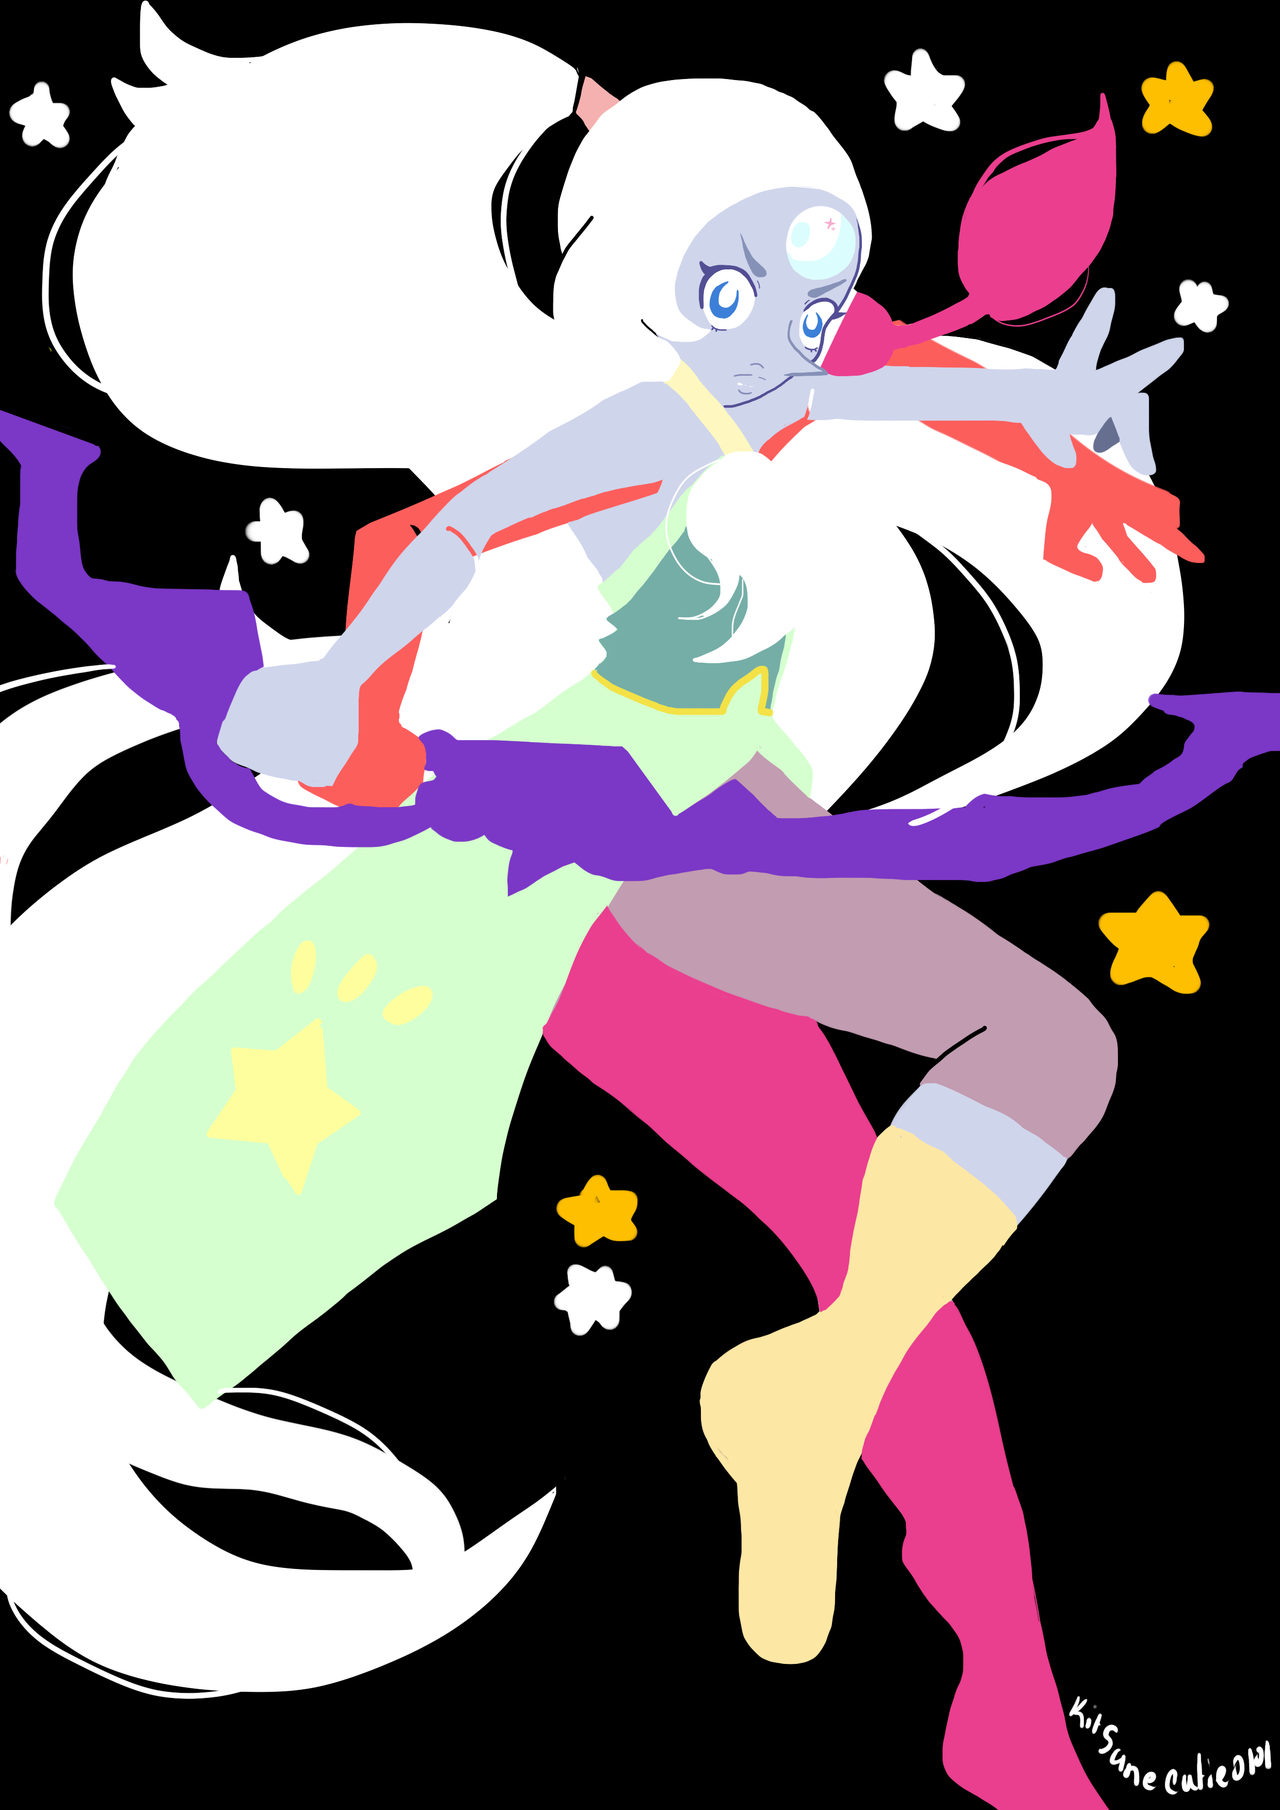 All I wanna do is see you turn into a giant woman, a giant woman!! I wish opal would appear more.